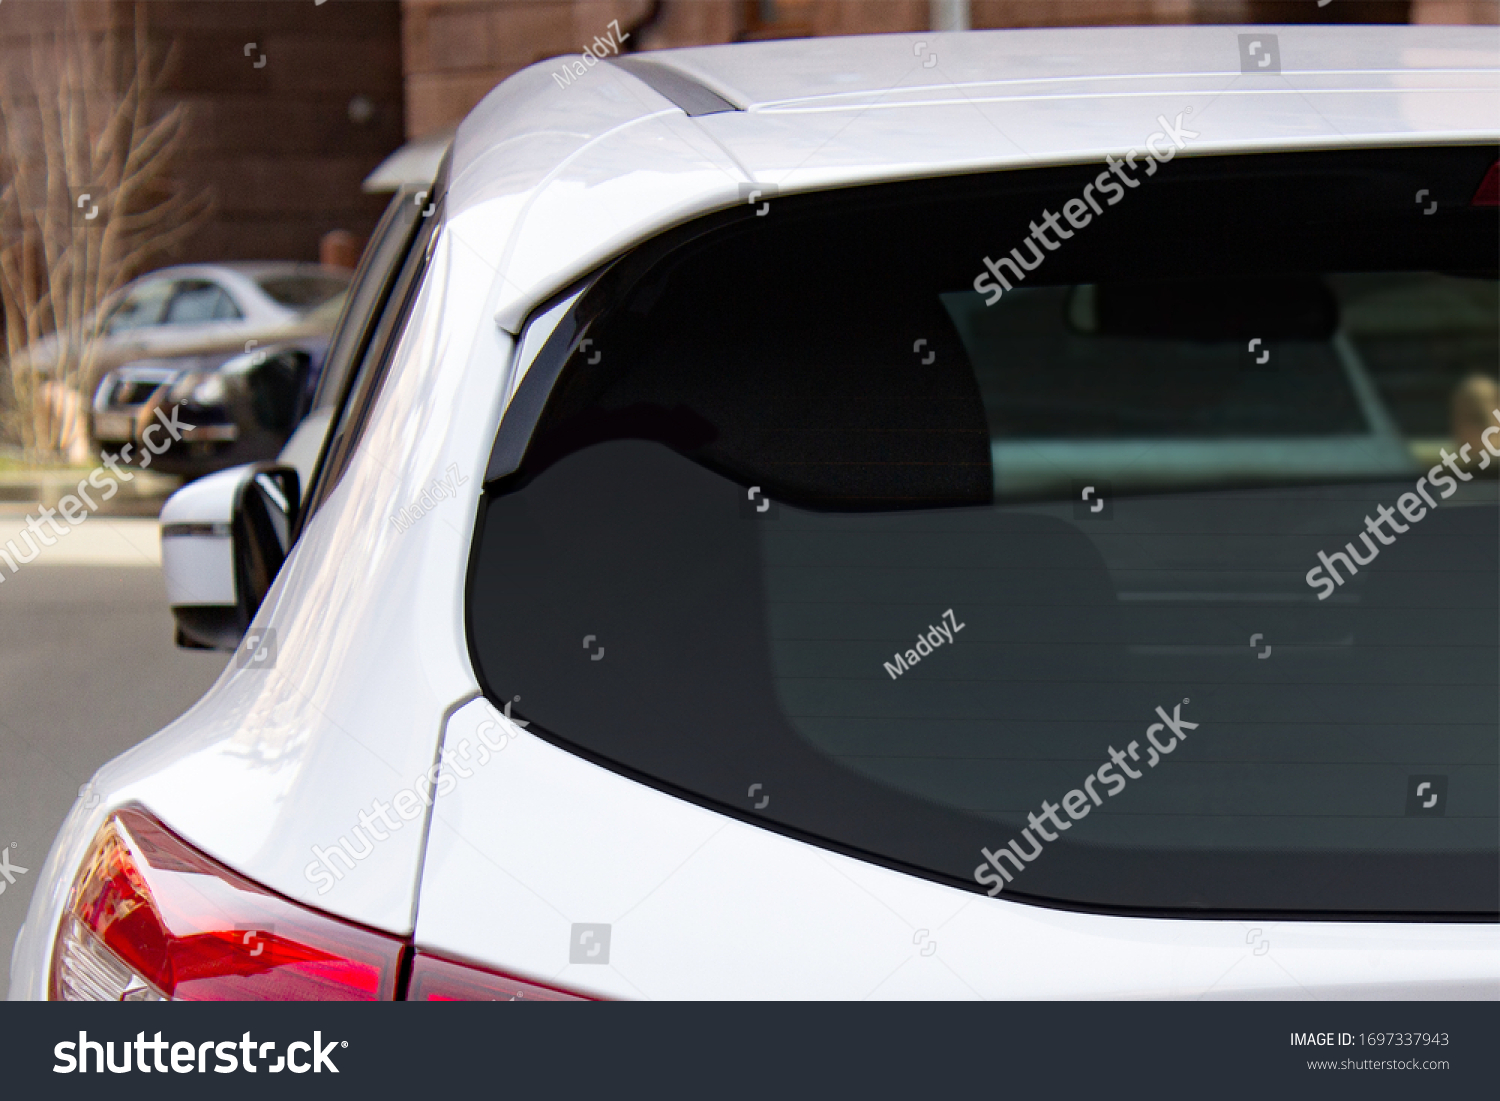 Back window of a white car parked on the street, rear view. Mock-up for sticker or decals #1697337943